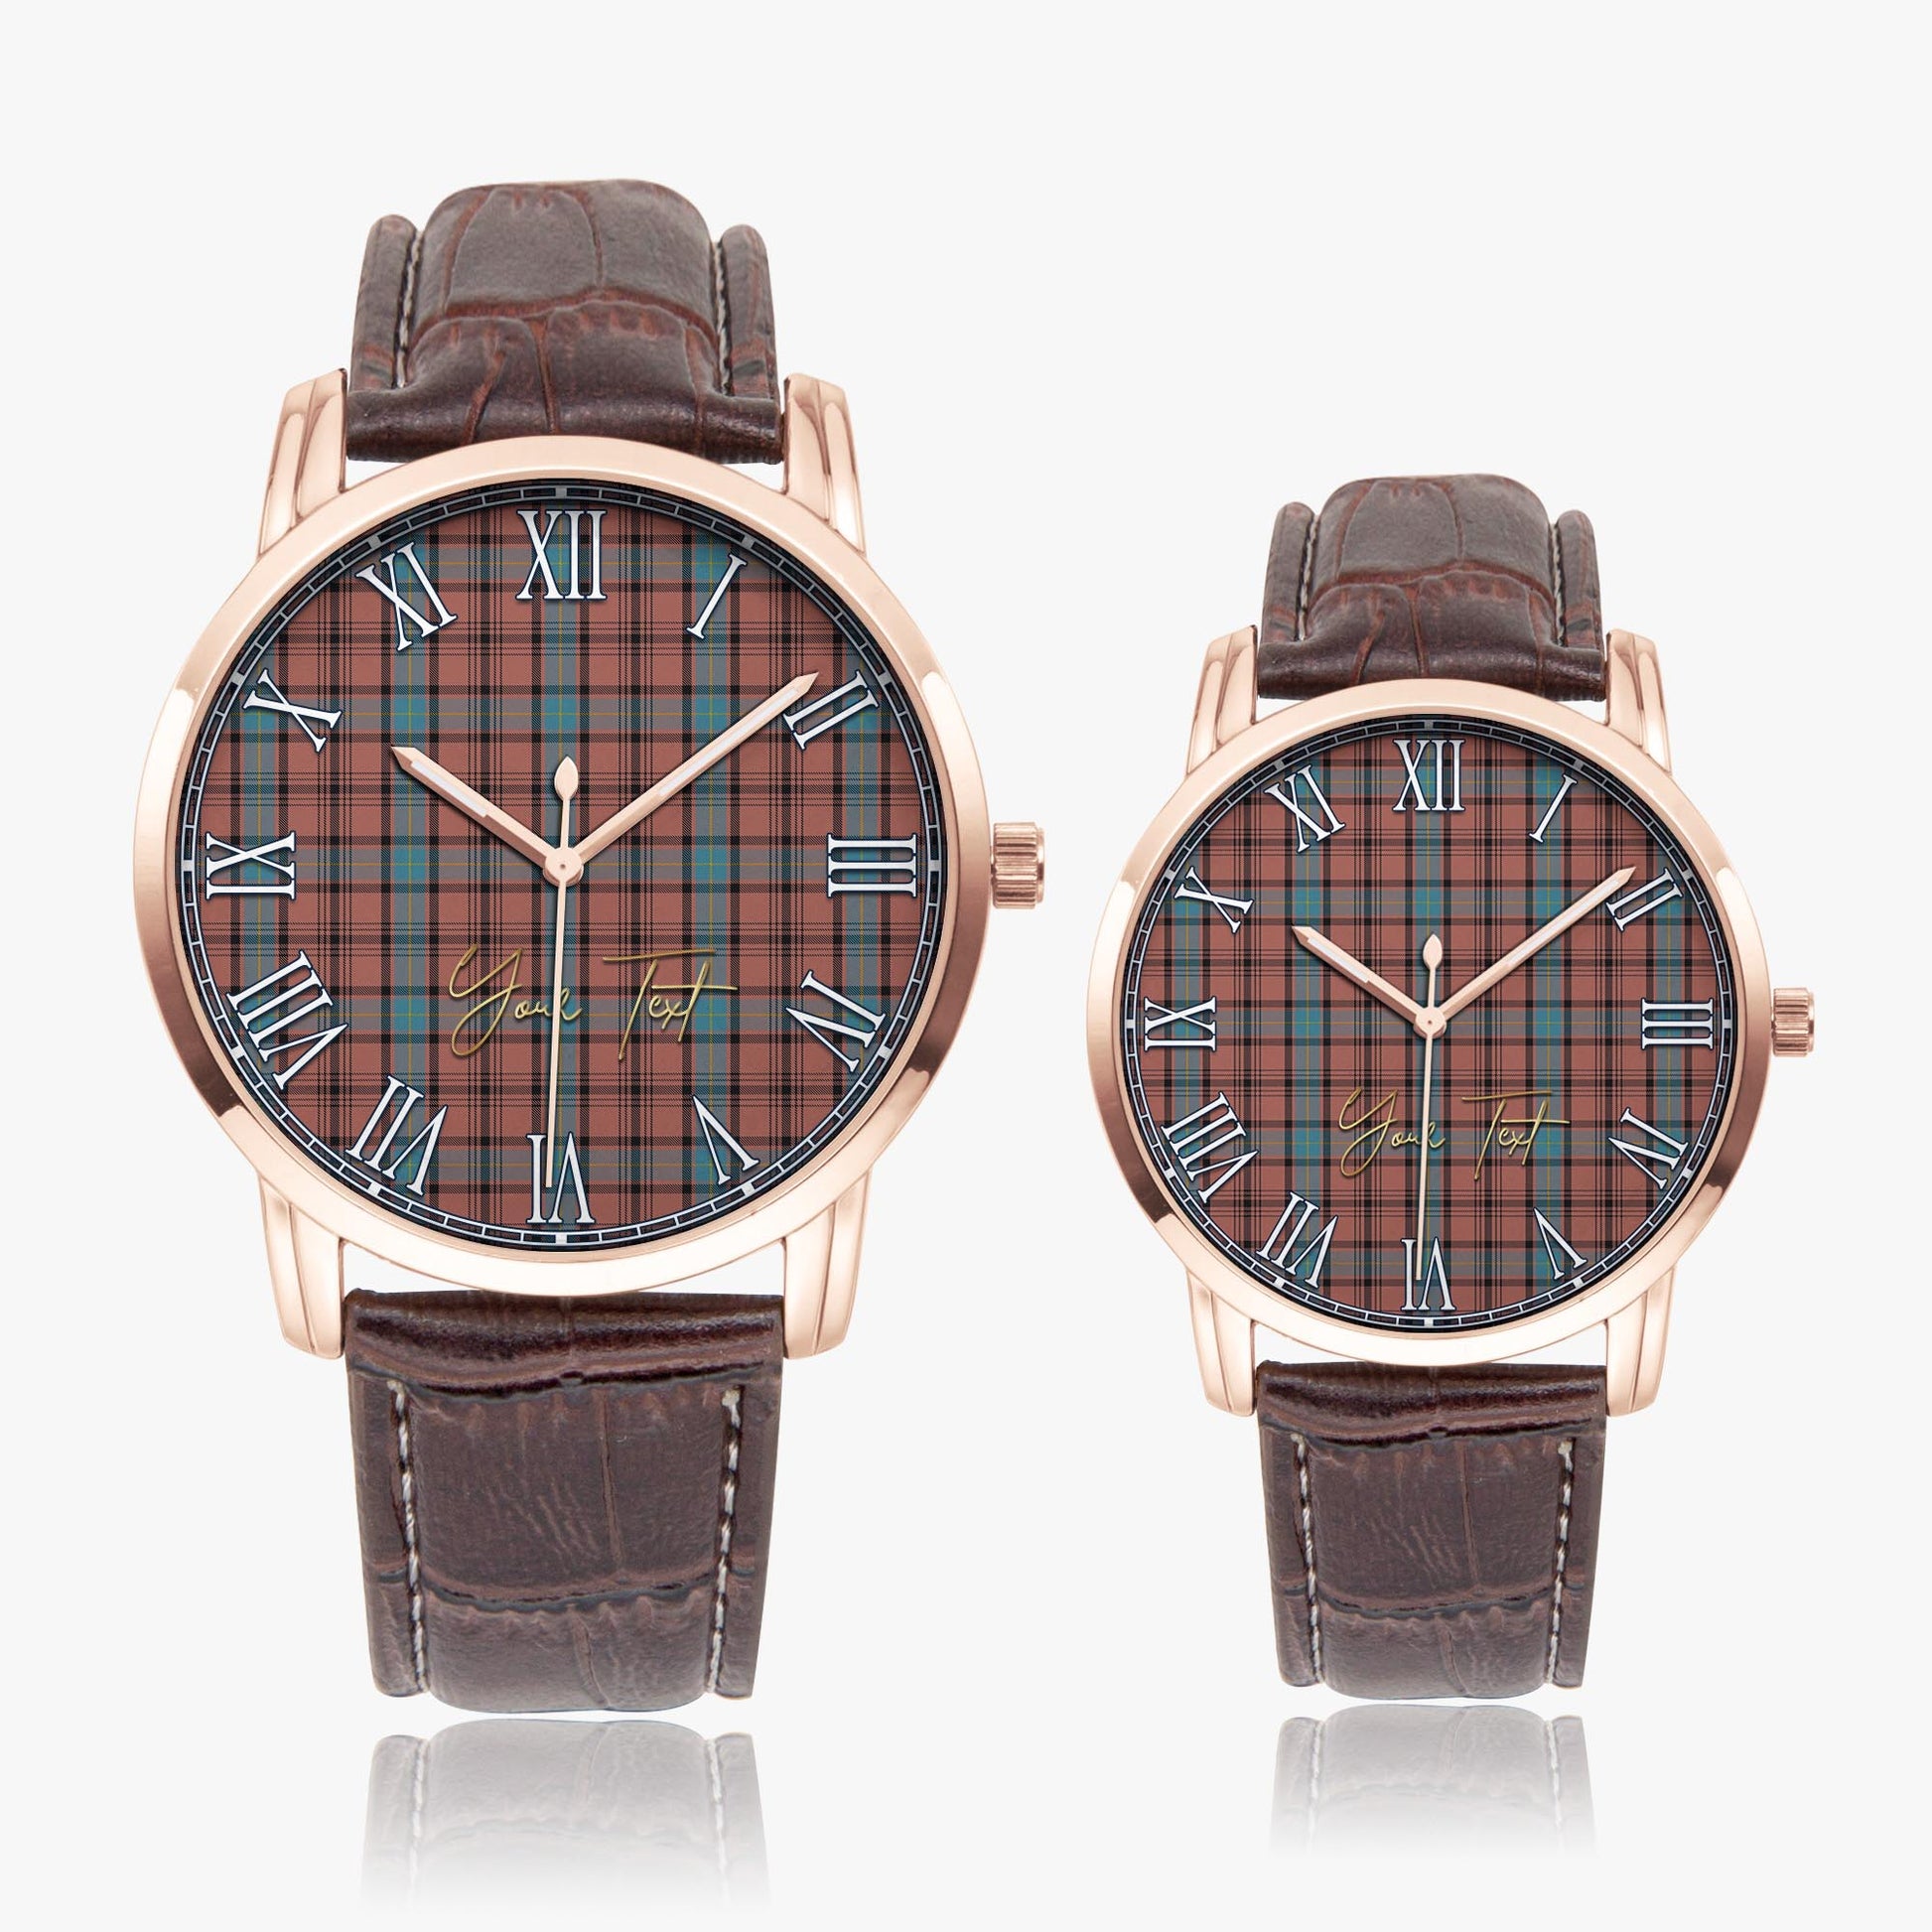 Hannay Dress Tartan Personalized Your Text Leather Trap Quartz Watch Wide Type Rose Gold Case With Brown Leather Strap - Tartanvibesclothing